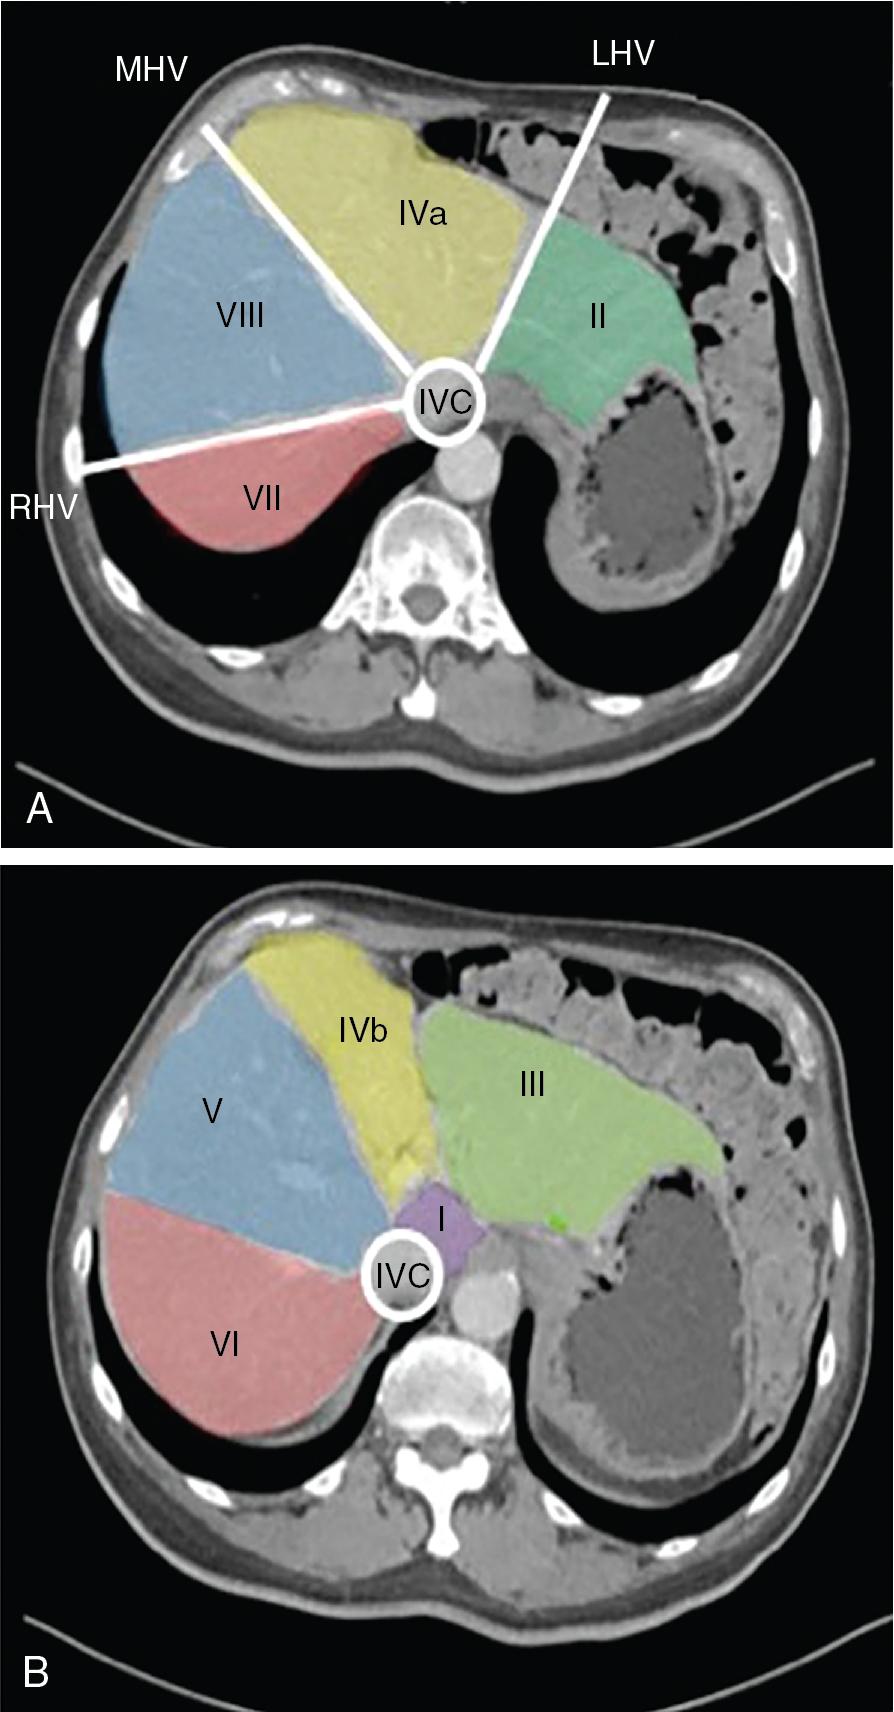 FIGURE 118B.2, The segments of the upper liver (A) and of the lower liver (B) are shown.